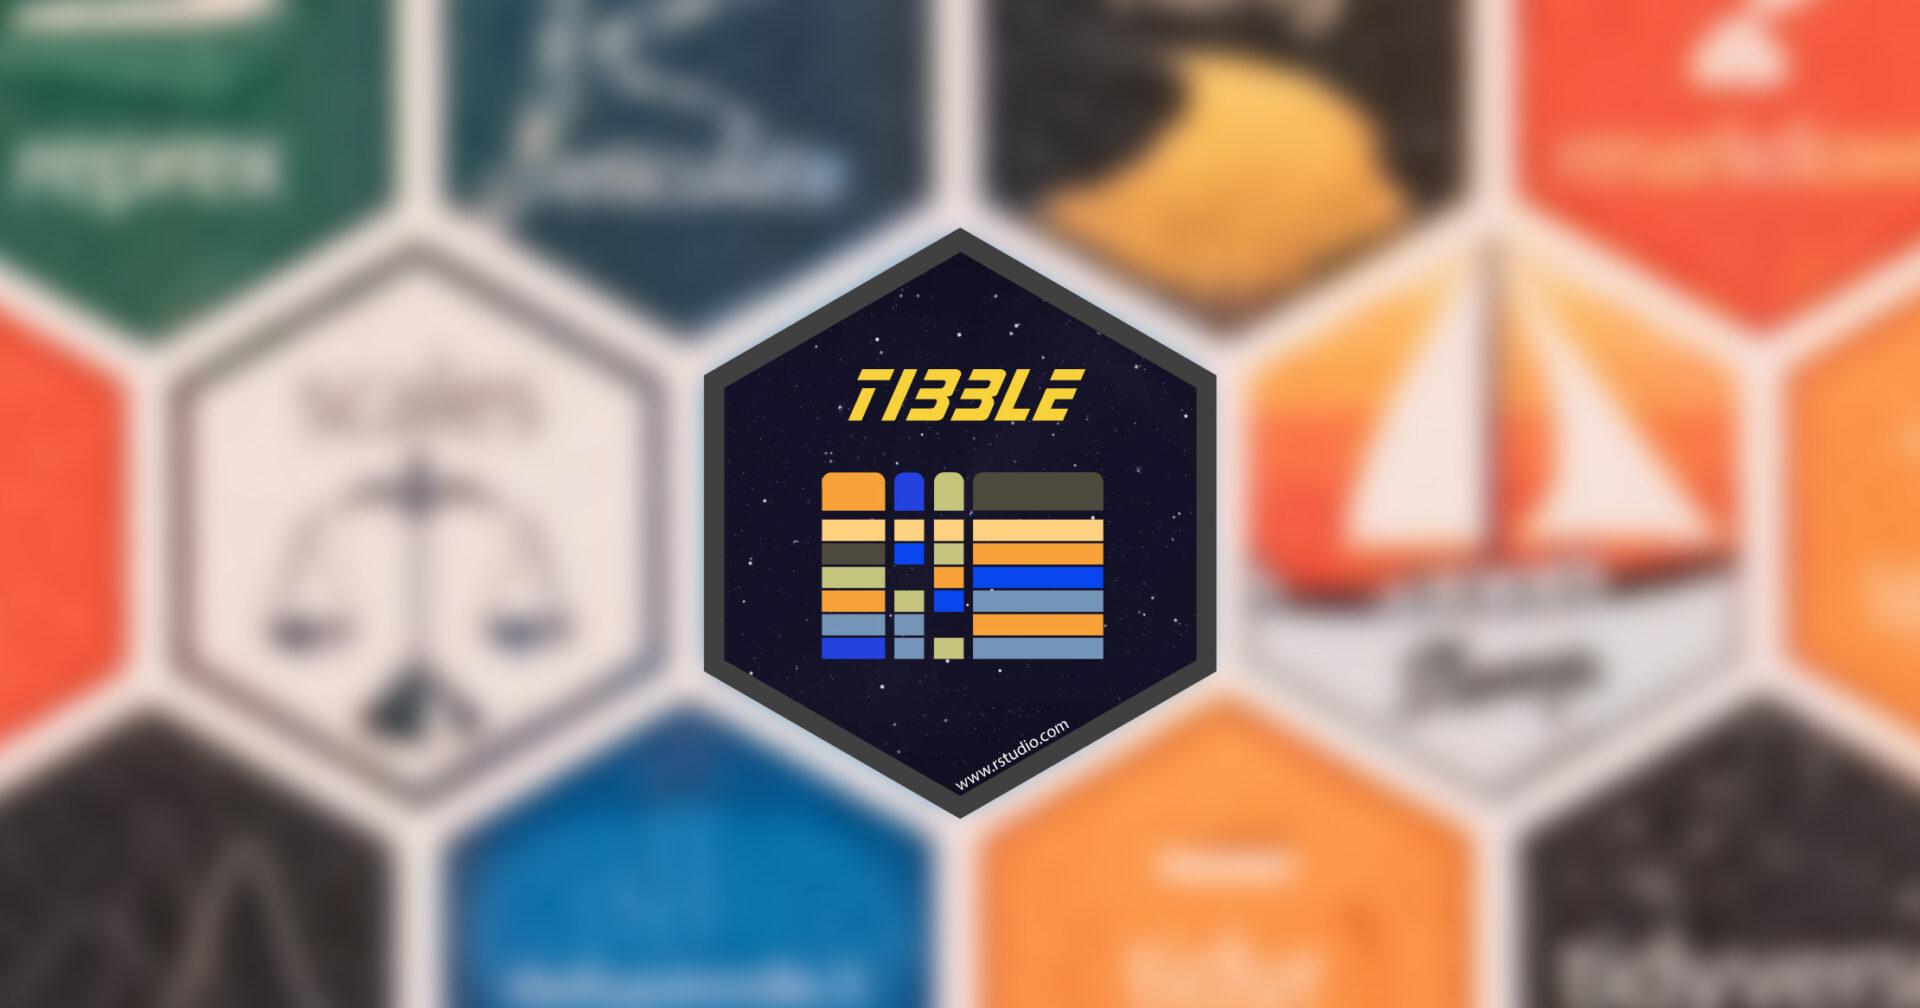 The tibble package hex on a blurred wall of other package hexes